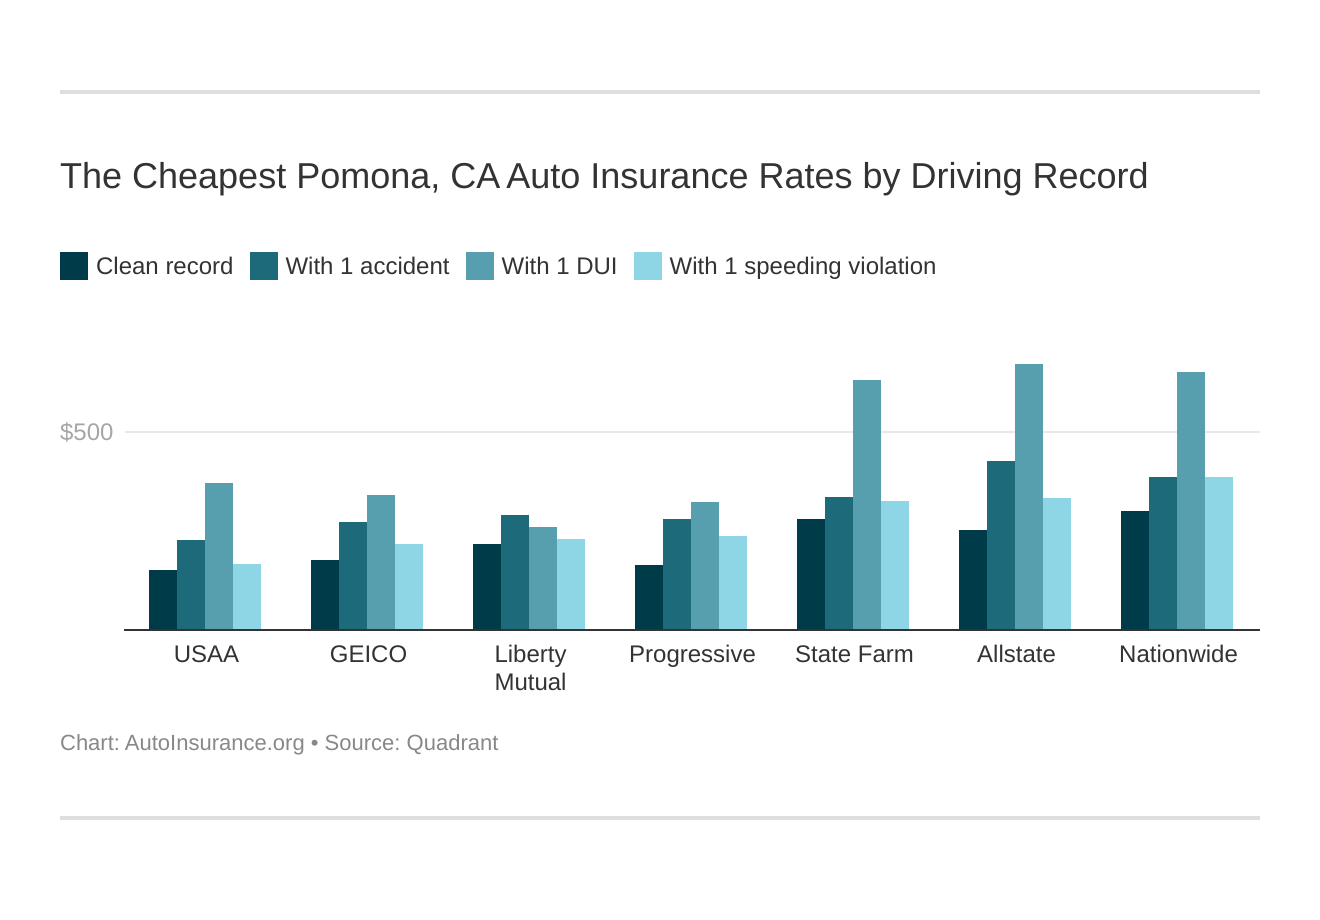 The Cheapest Pomona, CA Auto Insurance Rates by Driving Record